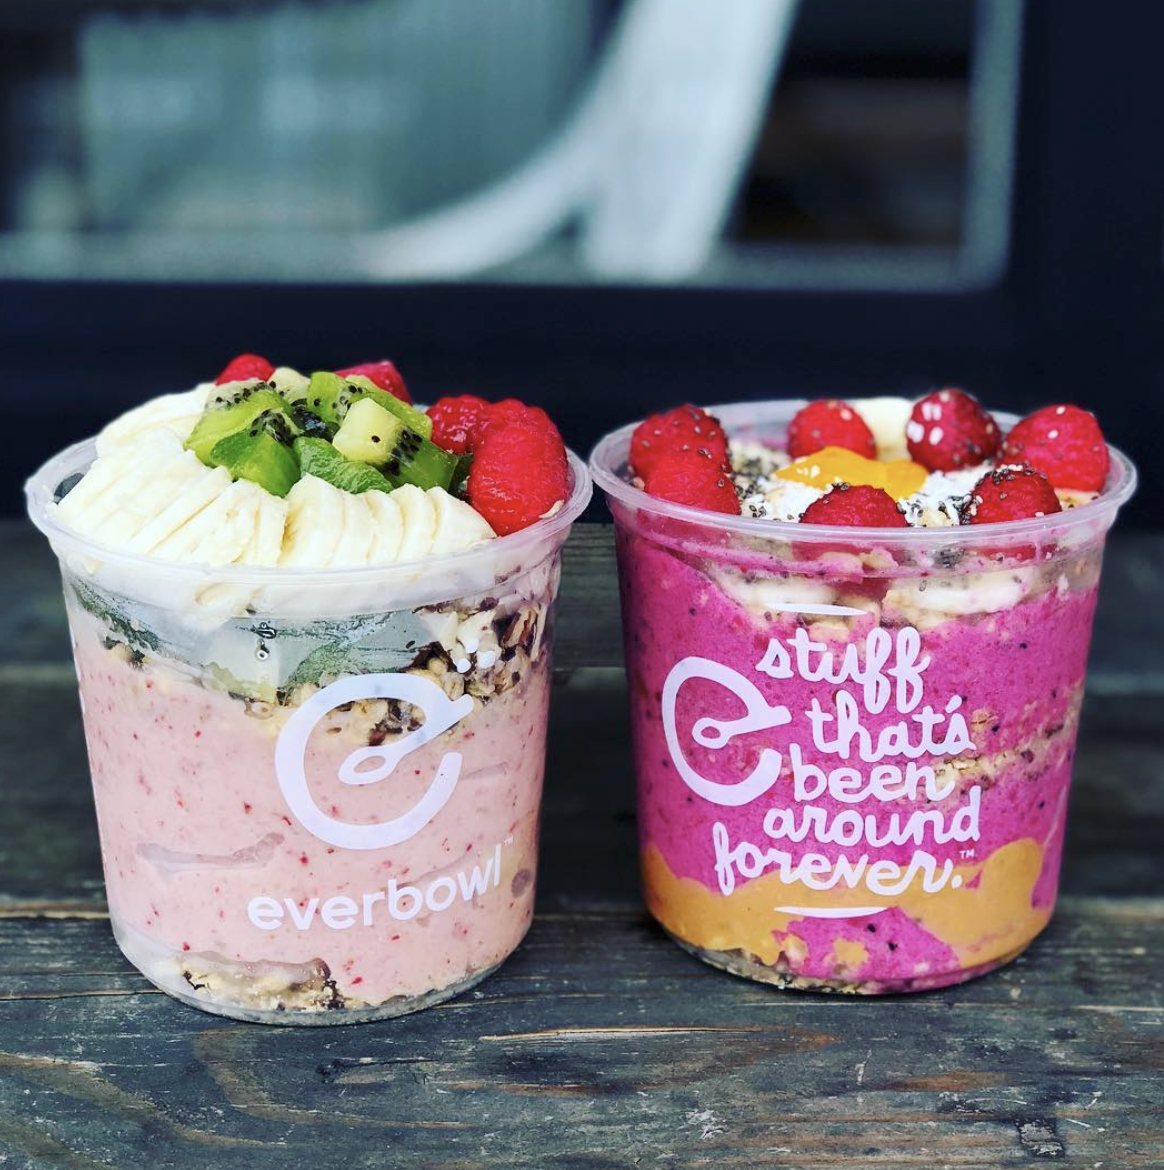 SanDiegoVille: Superfood Bowls & Smoothie Concept To Take Over San Diego | Everbowl To ...1164 x 1170